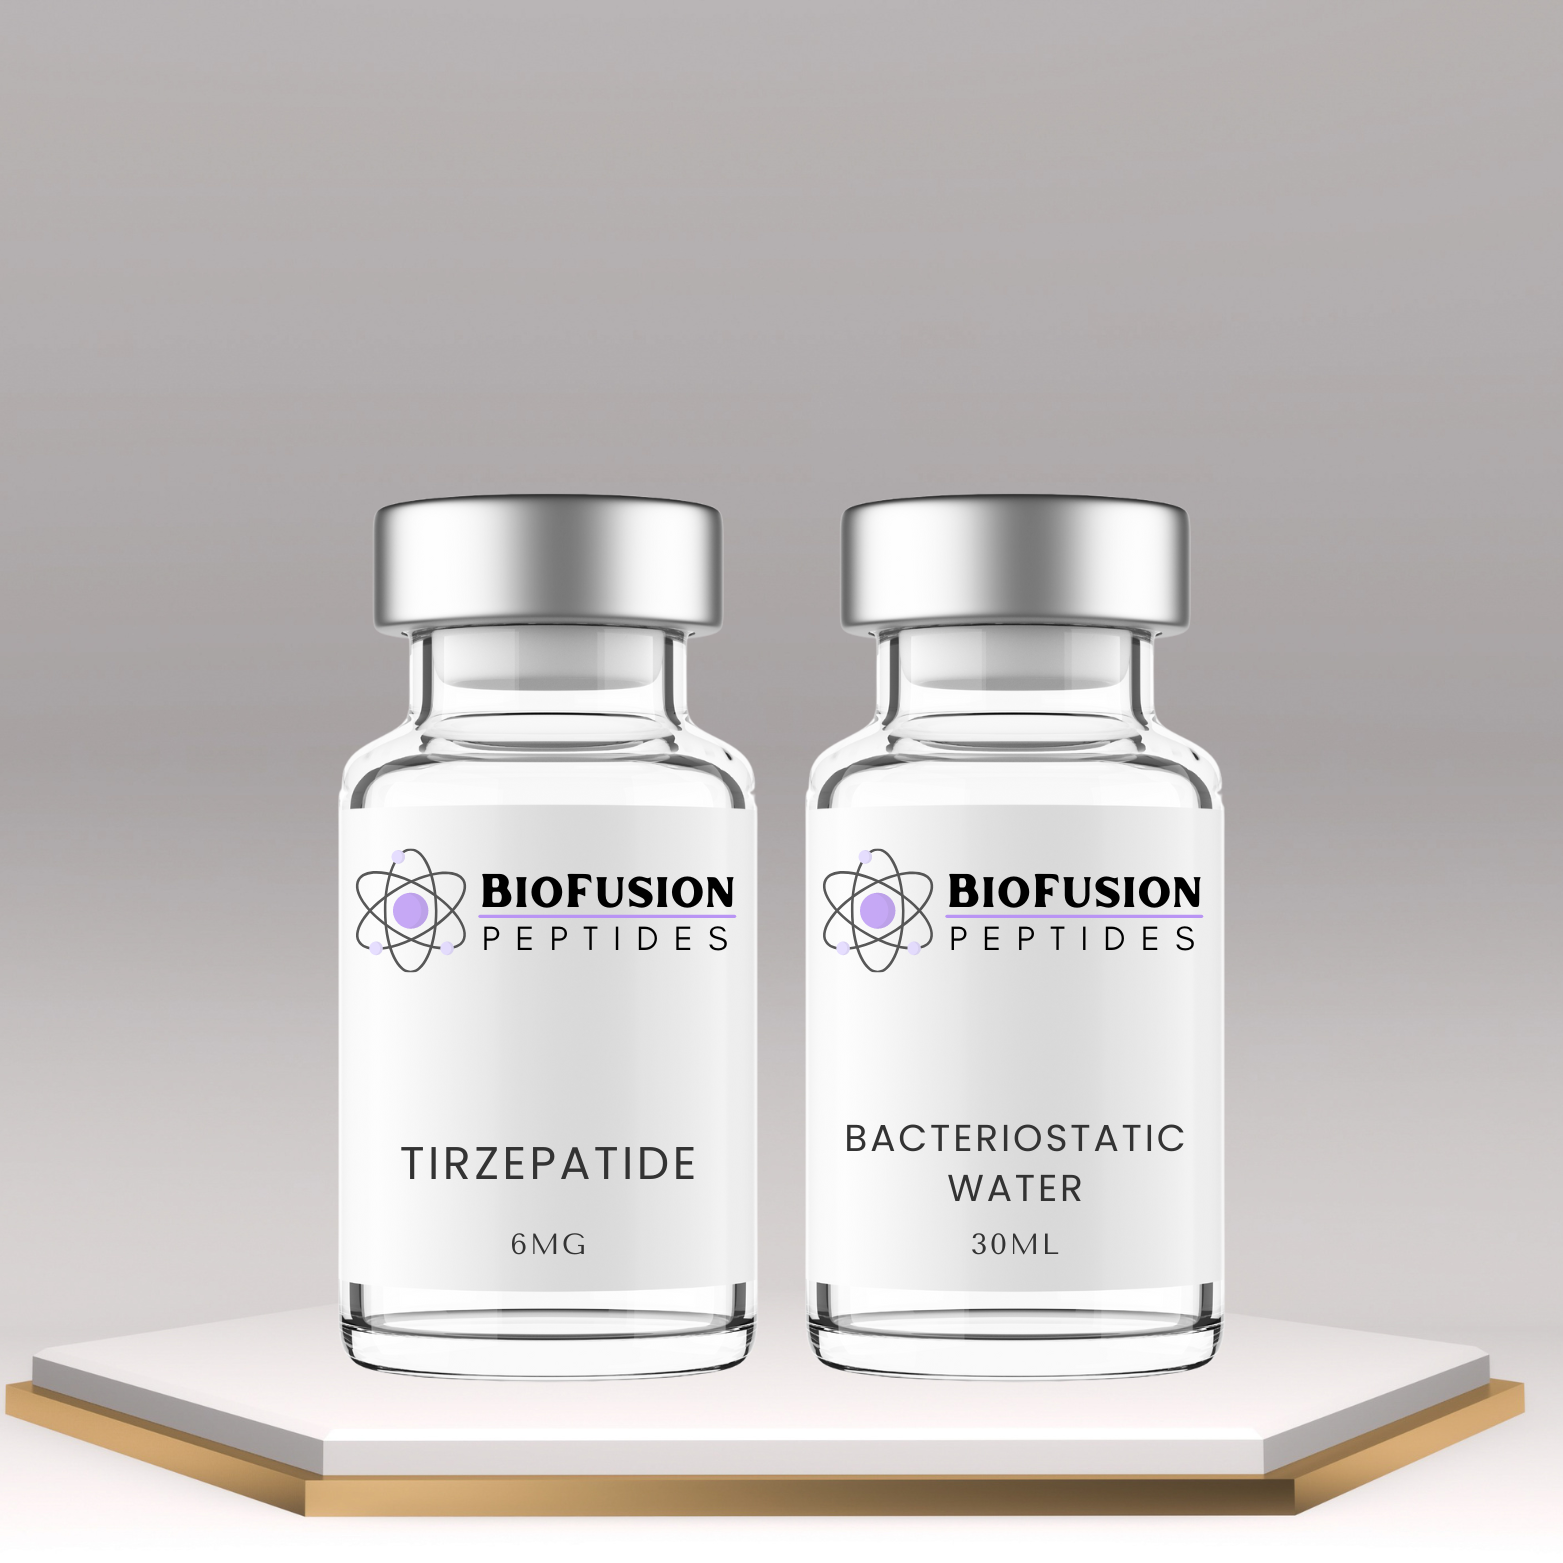 BioFusion Peptides Tirzepatide 6MG kit with bacteriostatic water